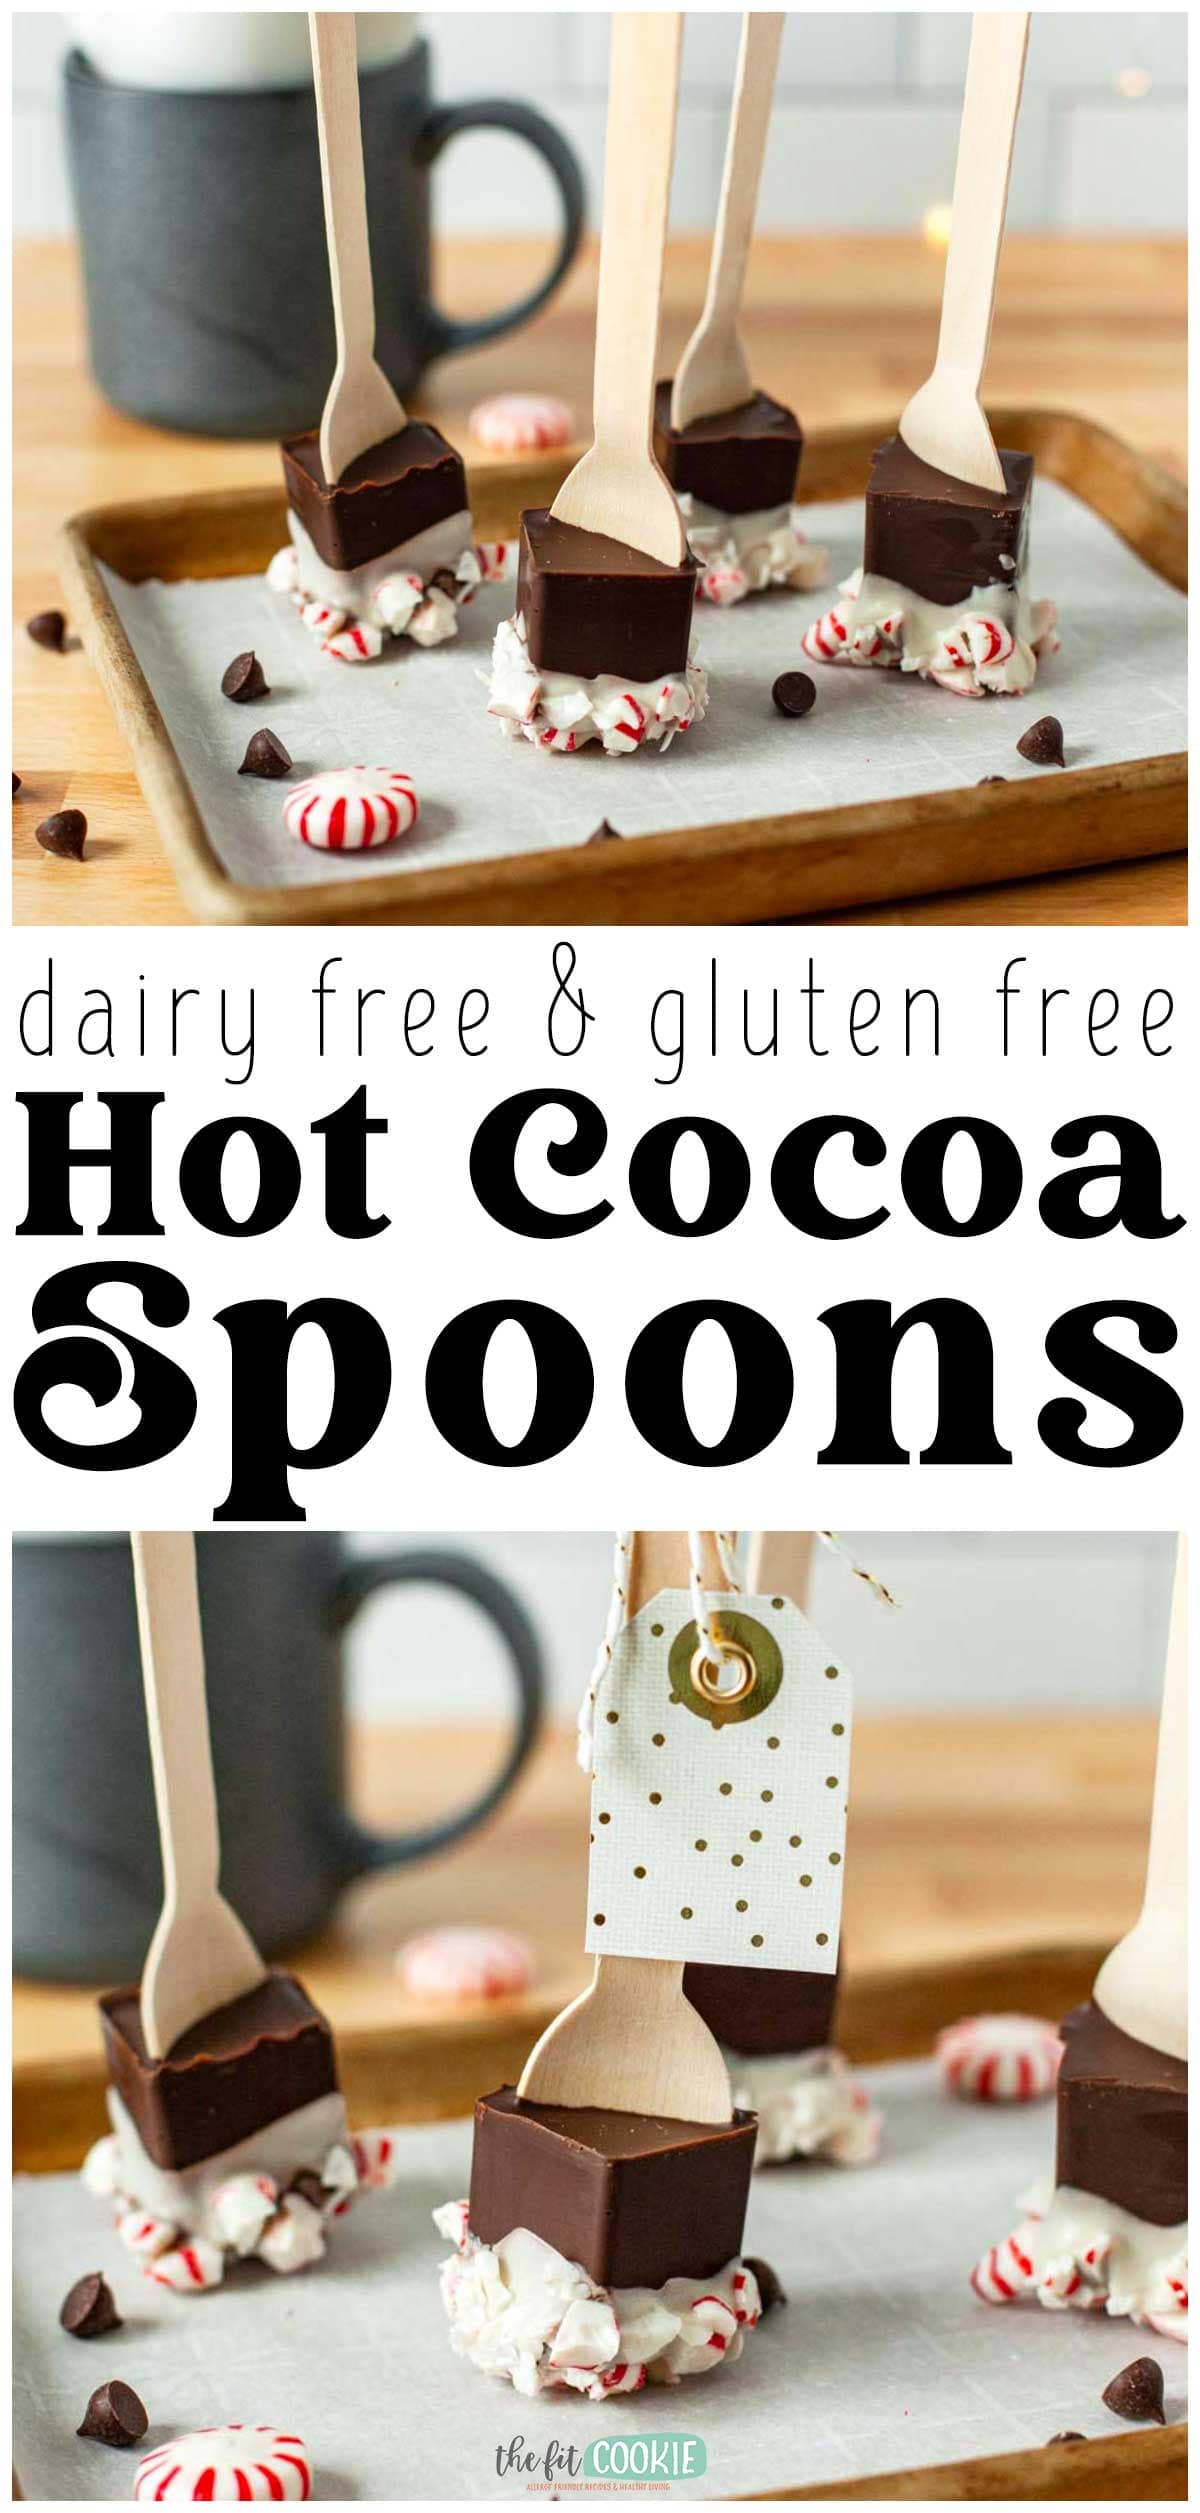 photo collage of dairy free hot chocolate spoons